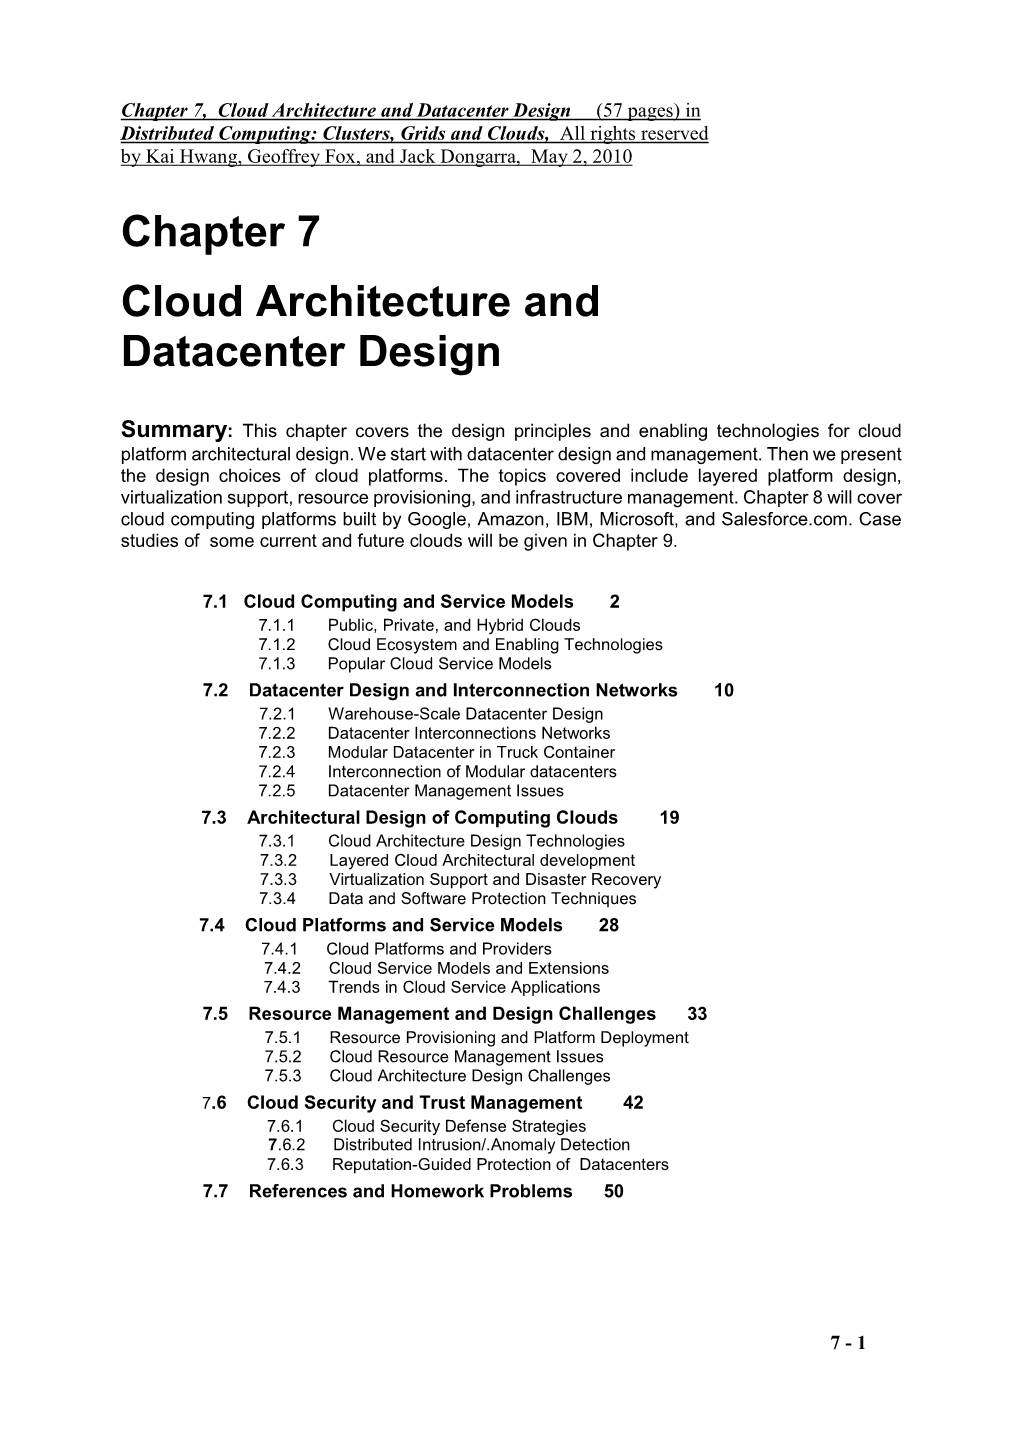 Chapter 7 Cloud Architecture and Datacenter Design